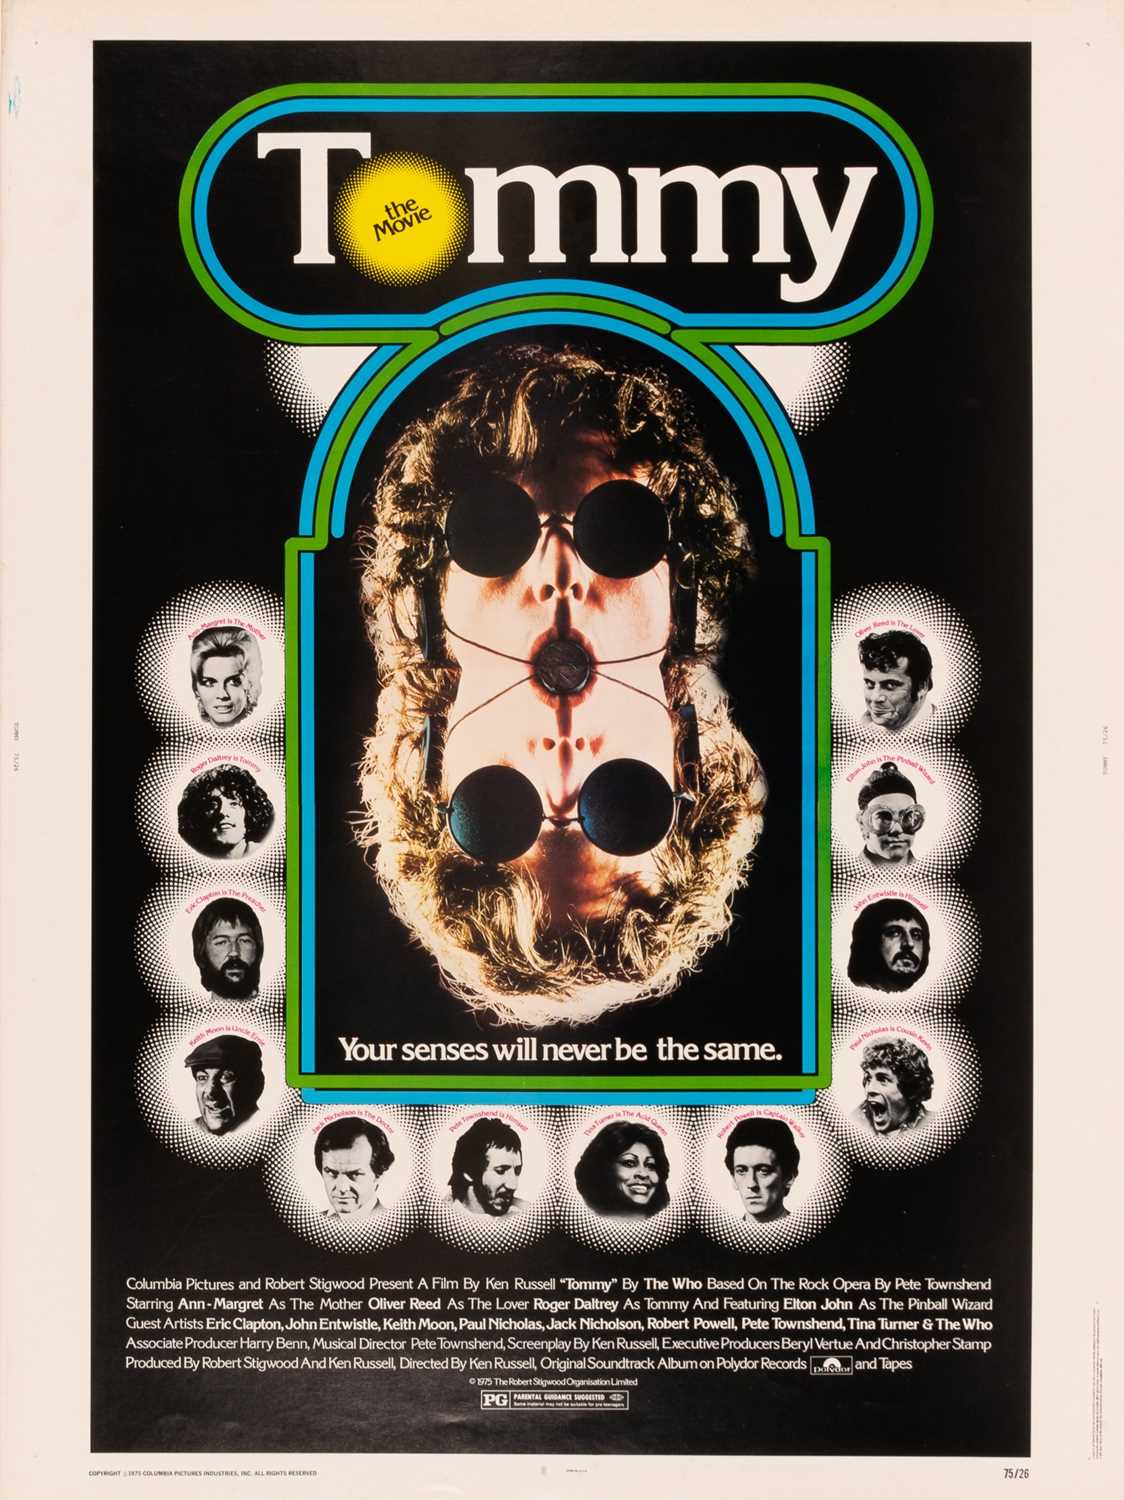 Lot 5085 - The film poster of The Who's 1969 rock opera about Tommy the Pinball Wizard